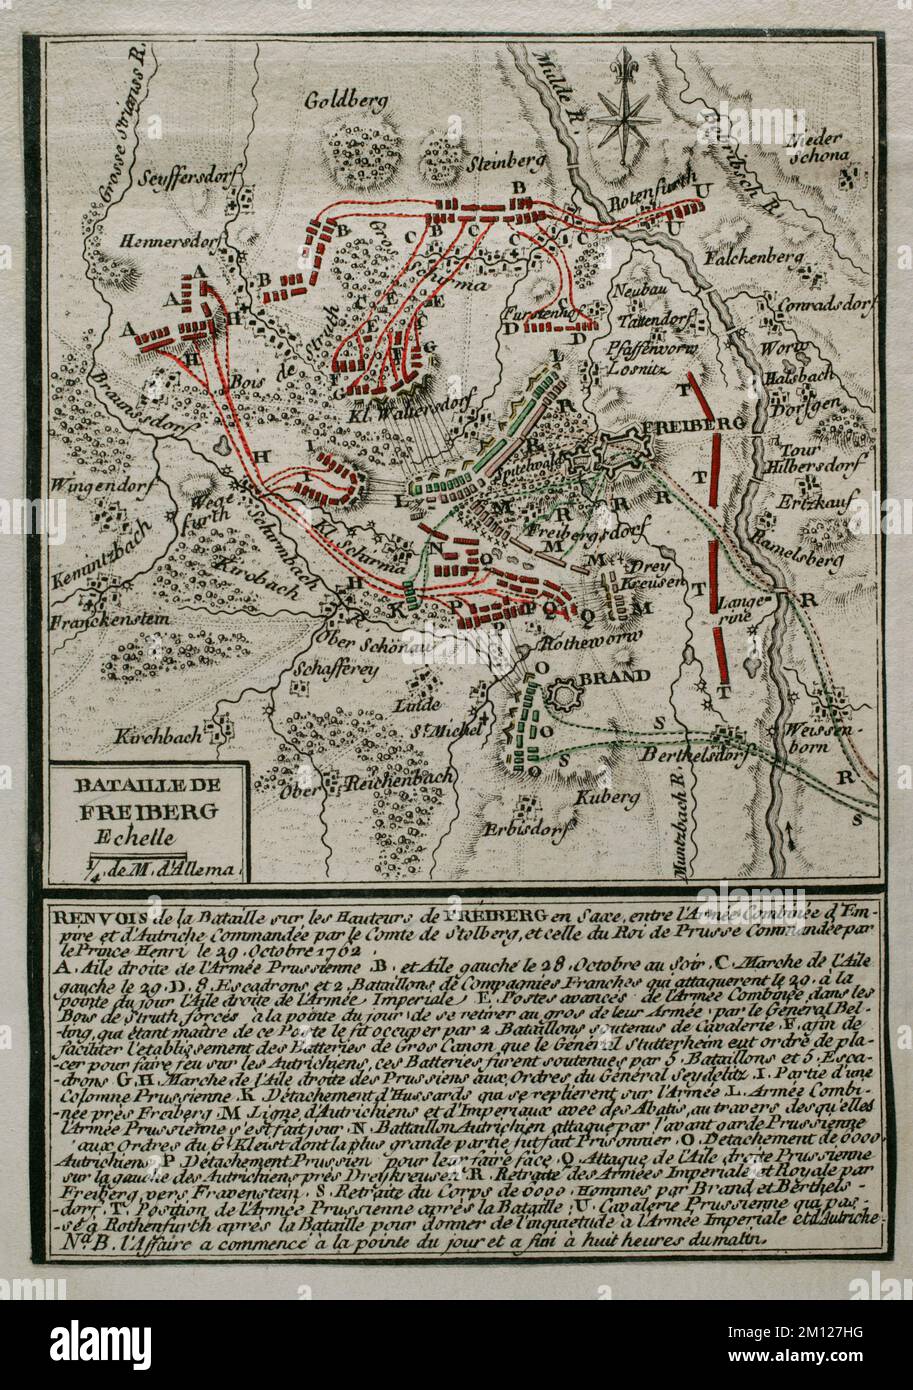 Seven Years War (1756-1763). Third Silesian War. Map of the Battle of Freiberg (29 October 1762). The Prussian army led by Prince Henry of Prussia, defeated an Austrian army under Frederick Charles of Stolberg-Gedern and Andras Hadik. Published in 1765 by the cartographer Jean de Beaurain (1696-1771) as an illustration of his Great Map of Germany, with the events that took place during the Seven Years War. Etching and engraving. French edition, 1765. Military Historical Library of Barcelona (Biblioteca Histórico Militar de Barcelona). Catalonia. Spain. Stock Photo